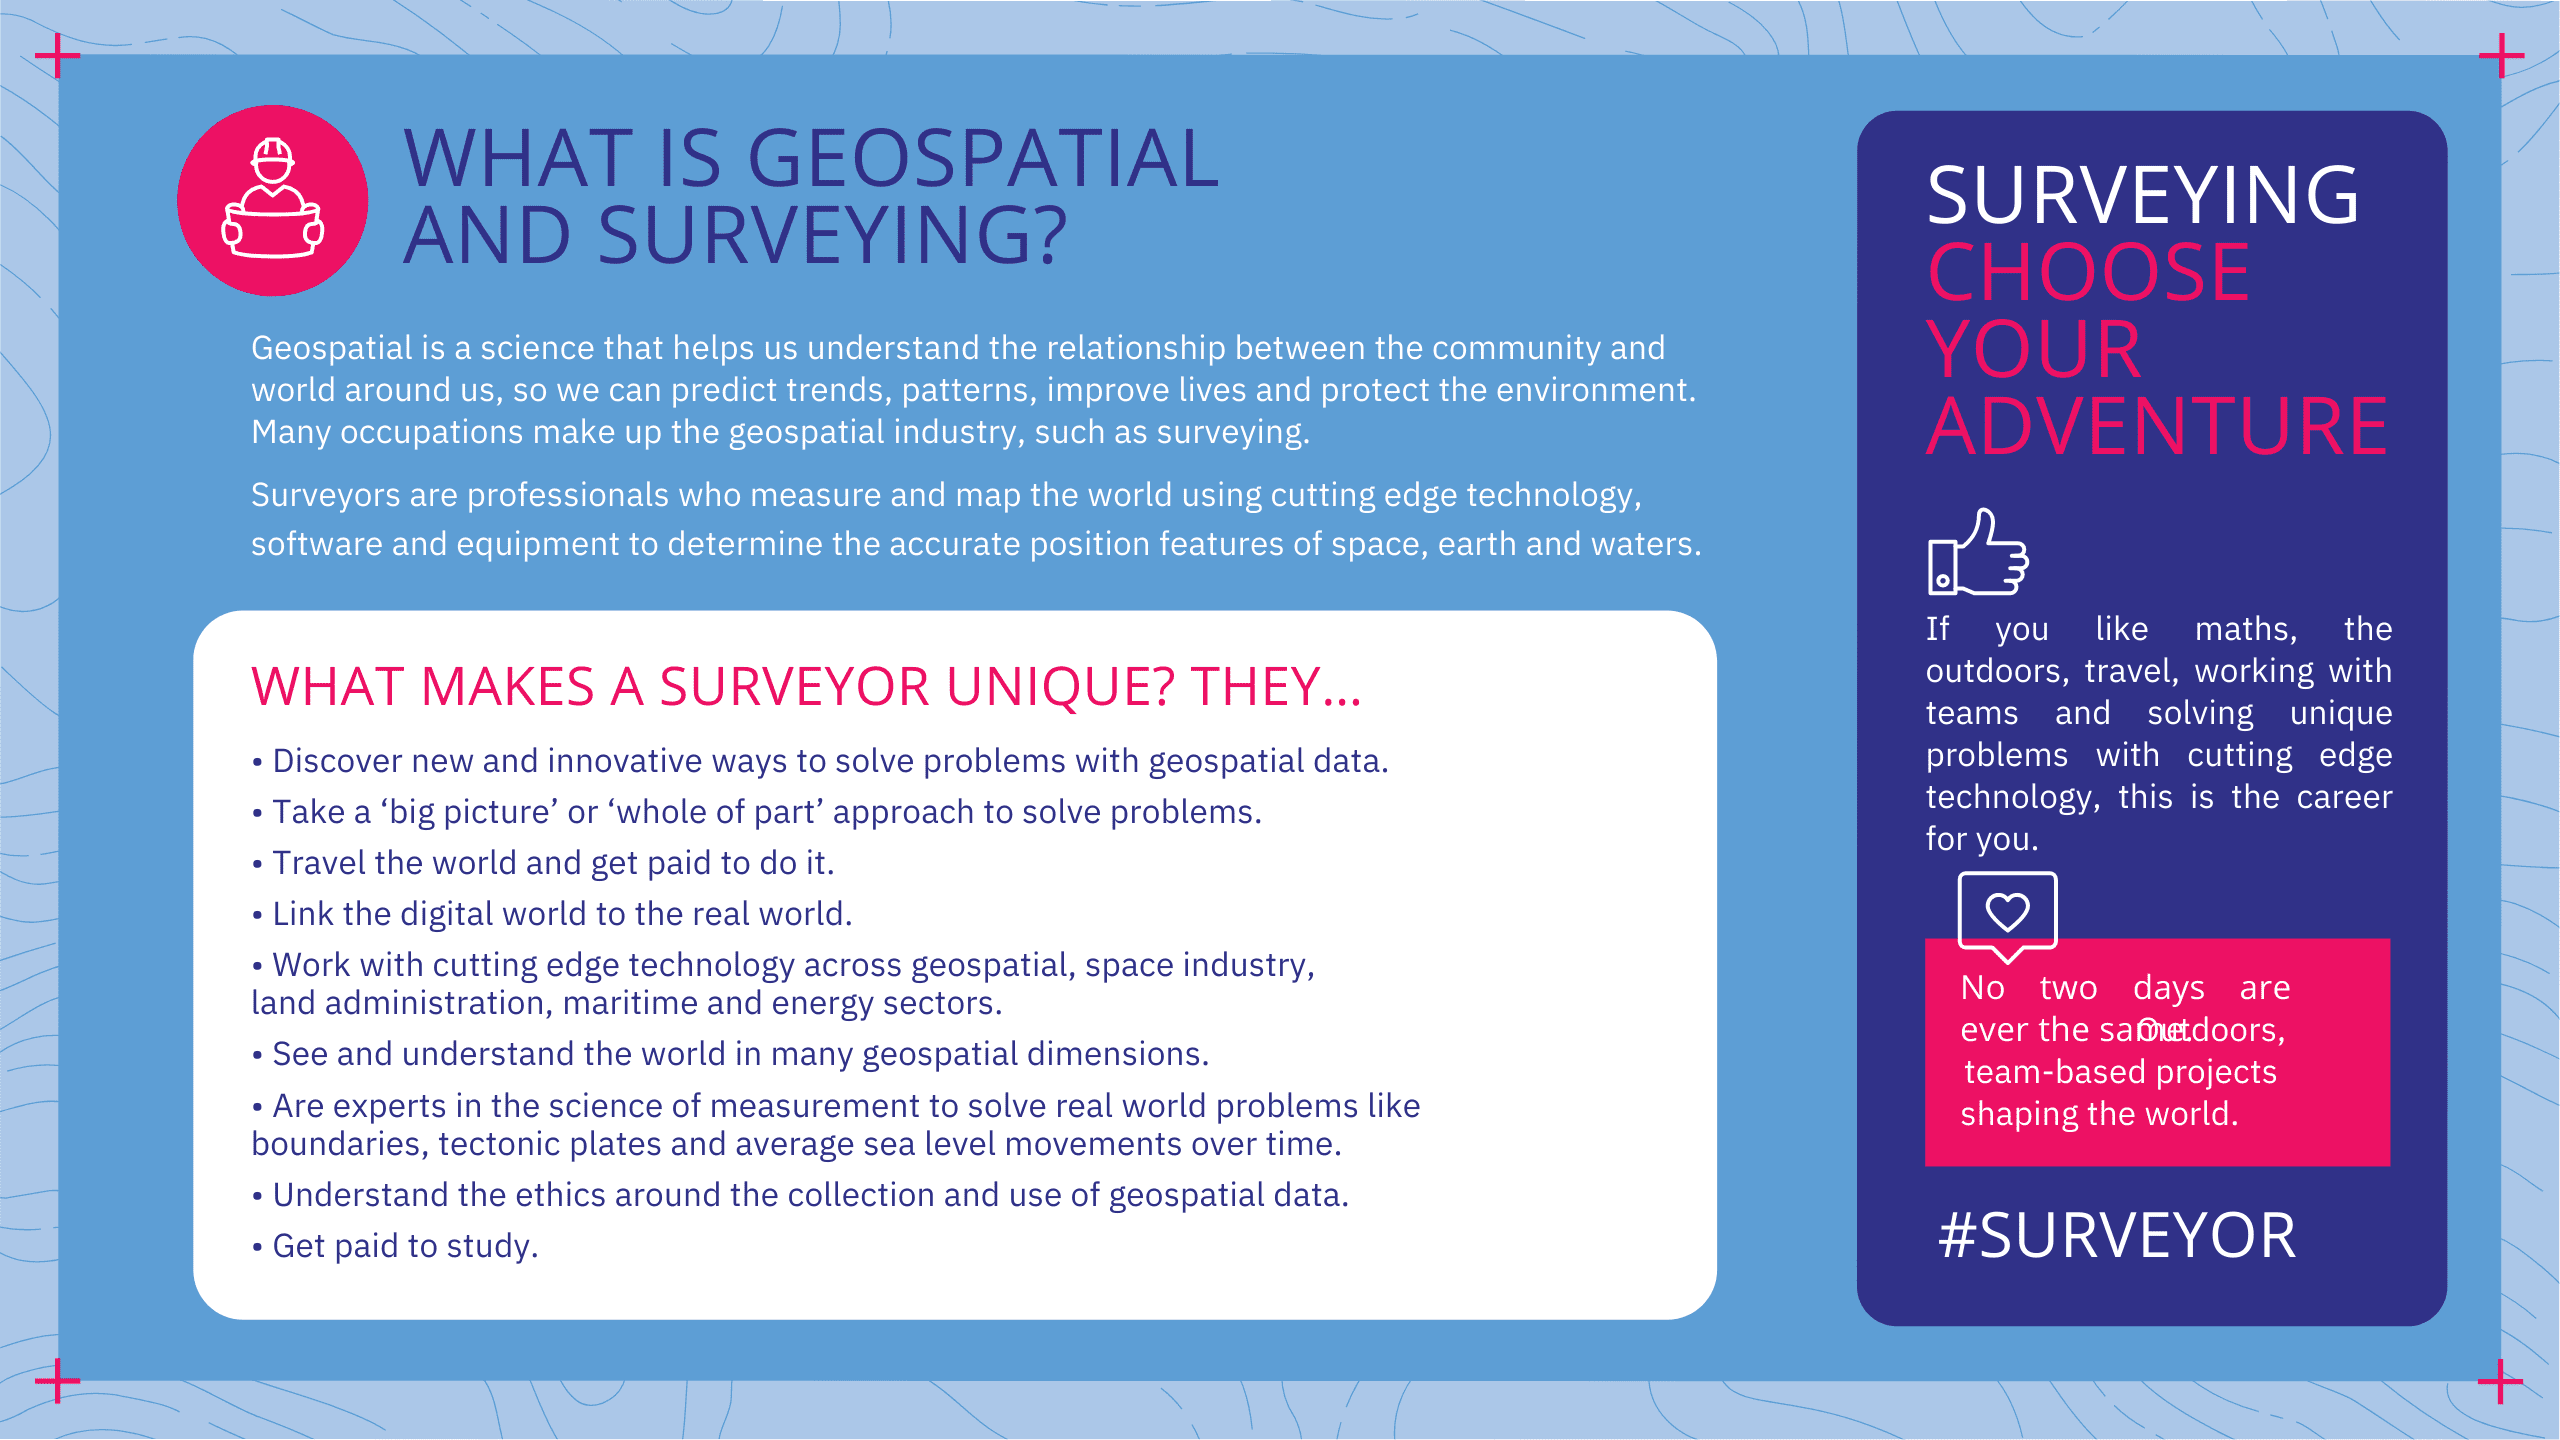 What is geospatial surveying